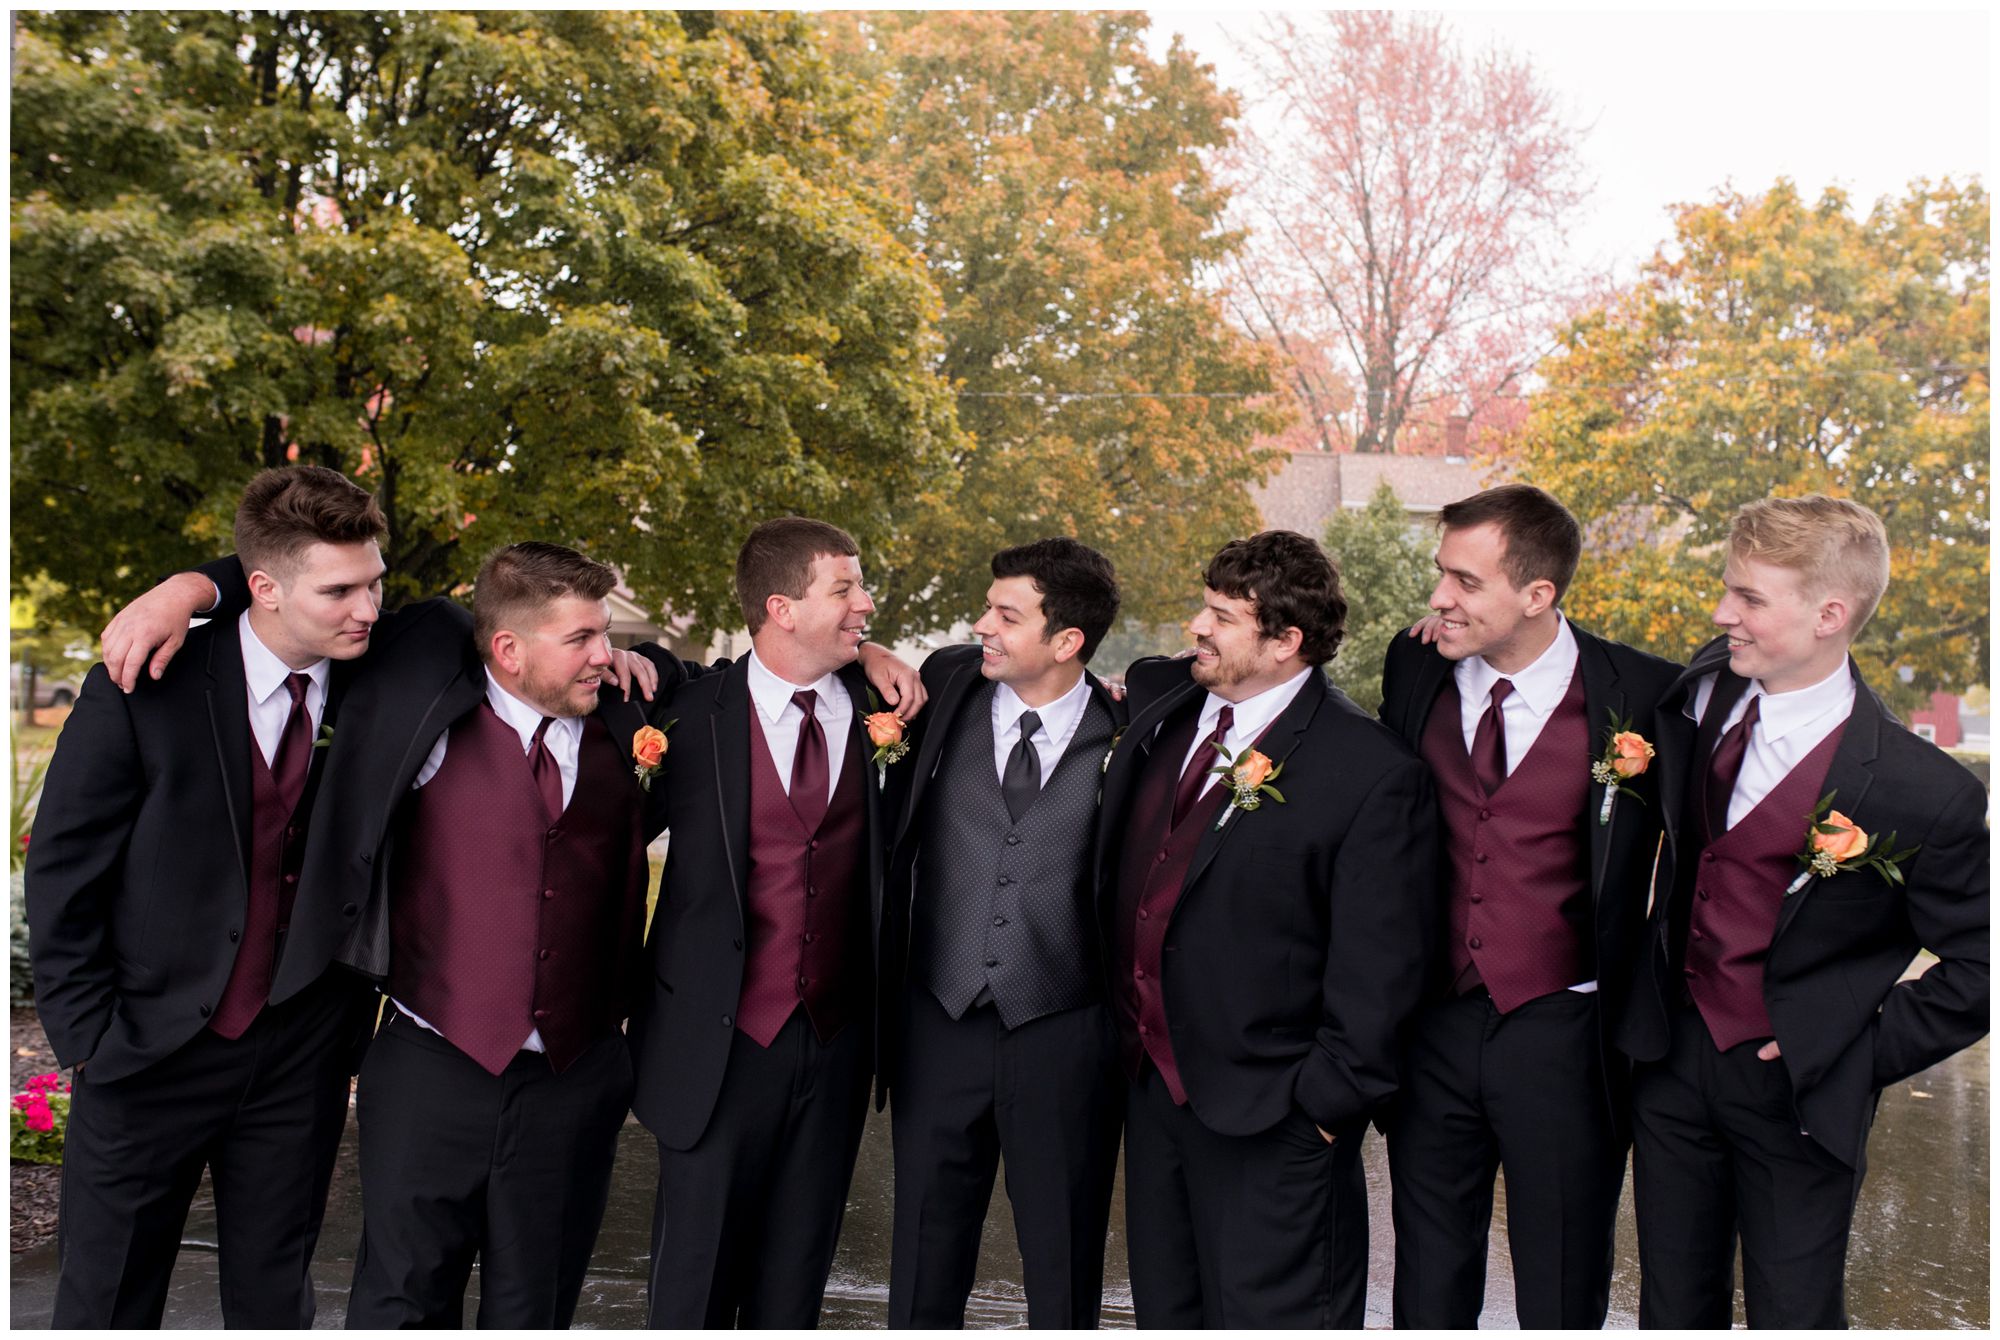 groom and groomsmen portraits before wedding ceremony at Zion Lutheran Church